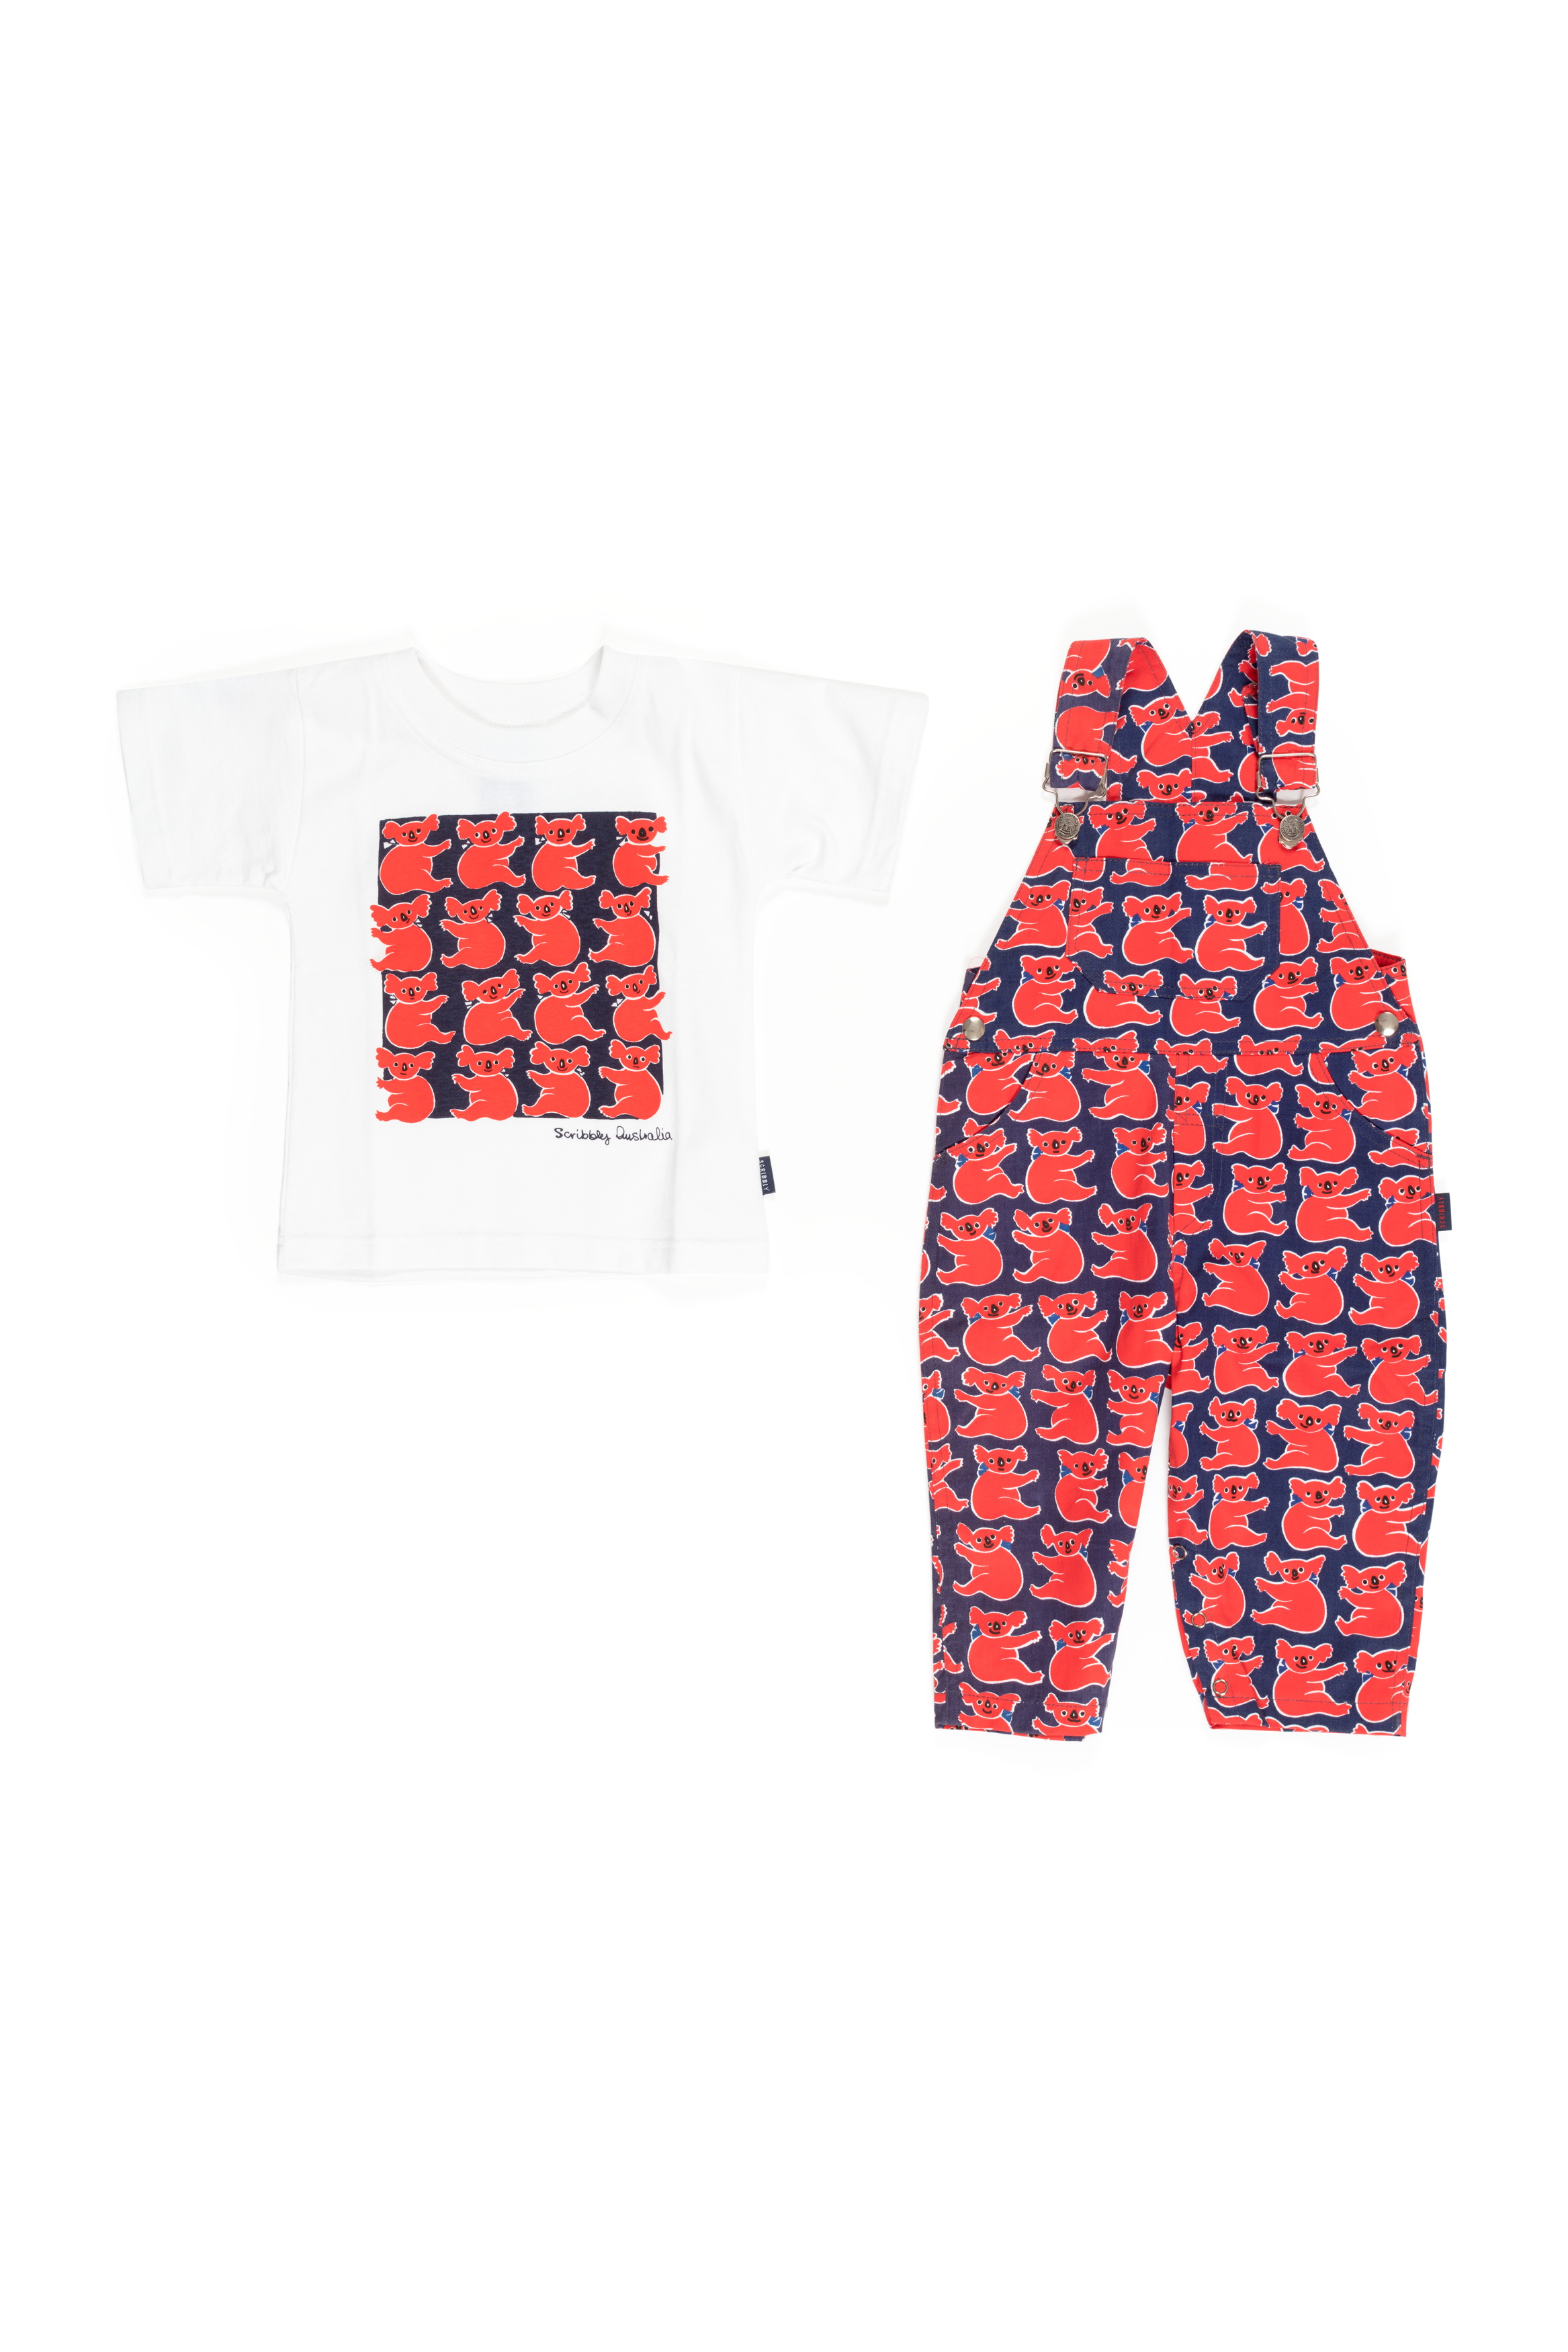 Scribbly Graphics overalls and t-shirt